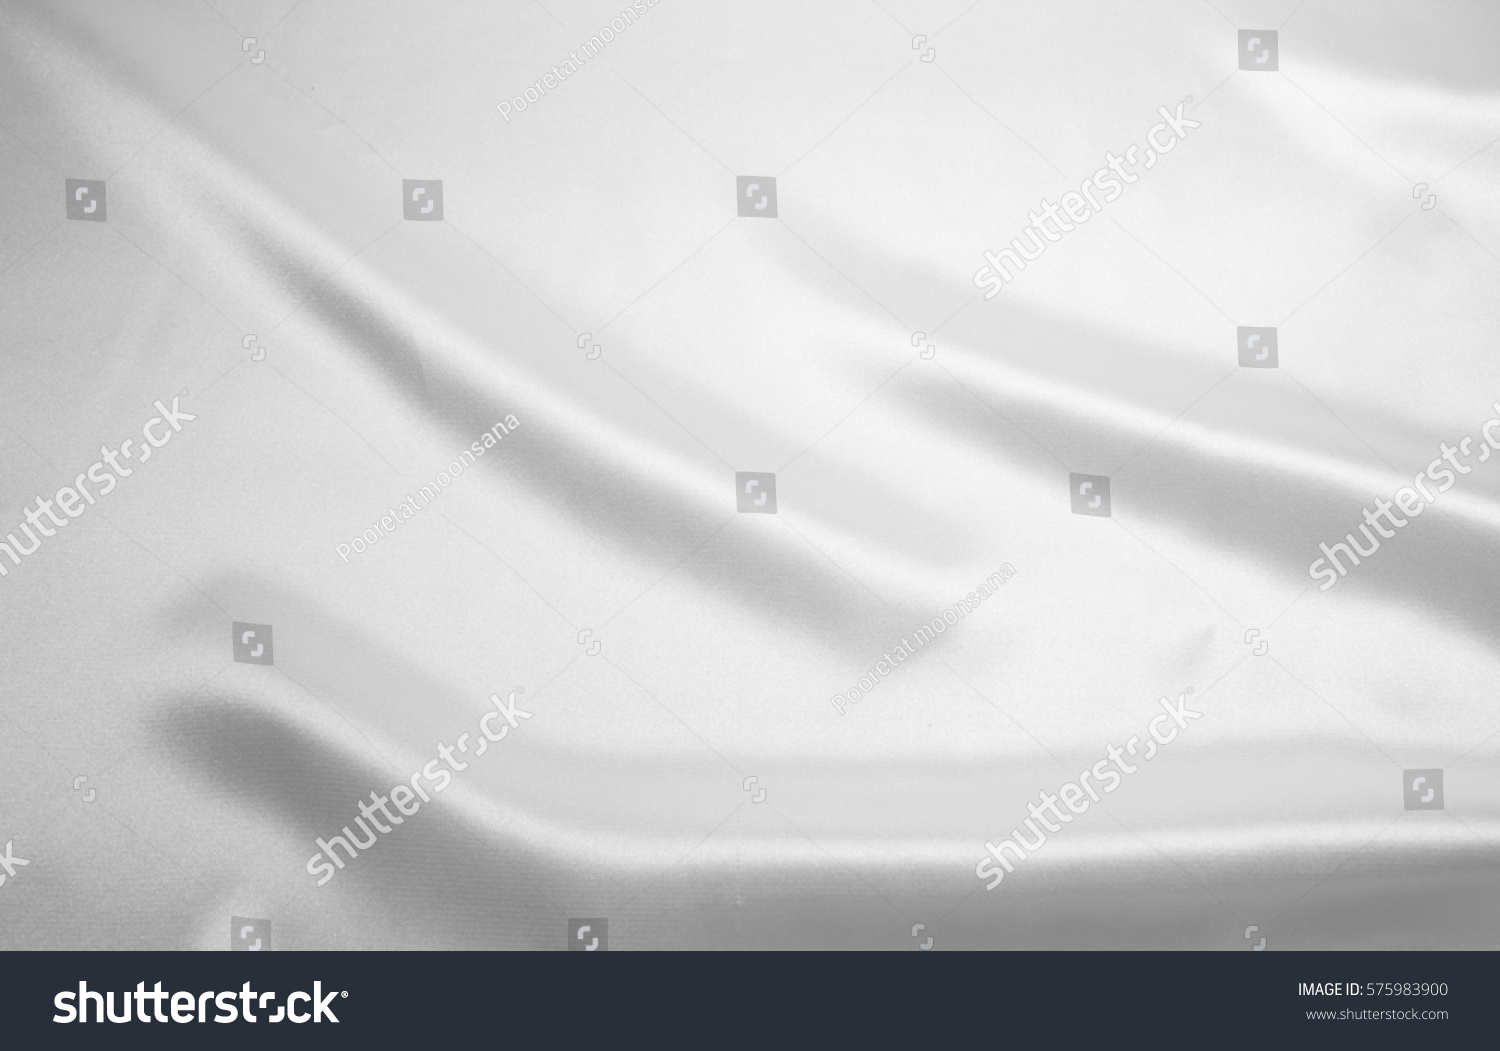 abstract background luxury cloth or liquid wave or wavy folds #575983900